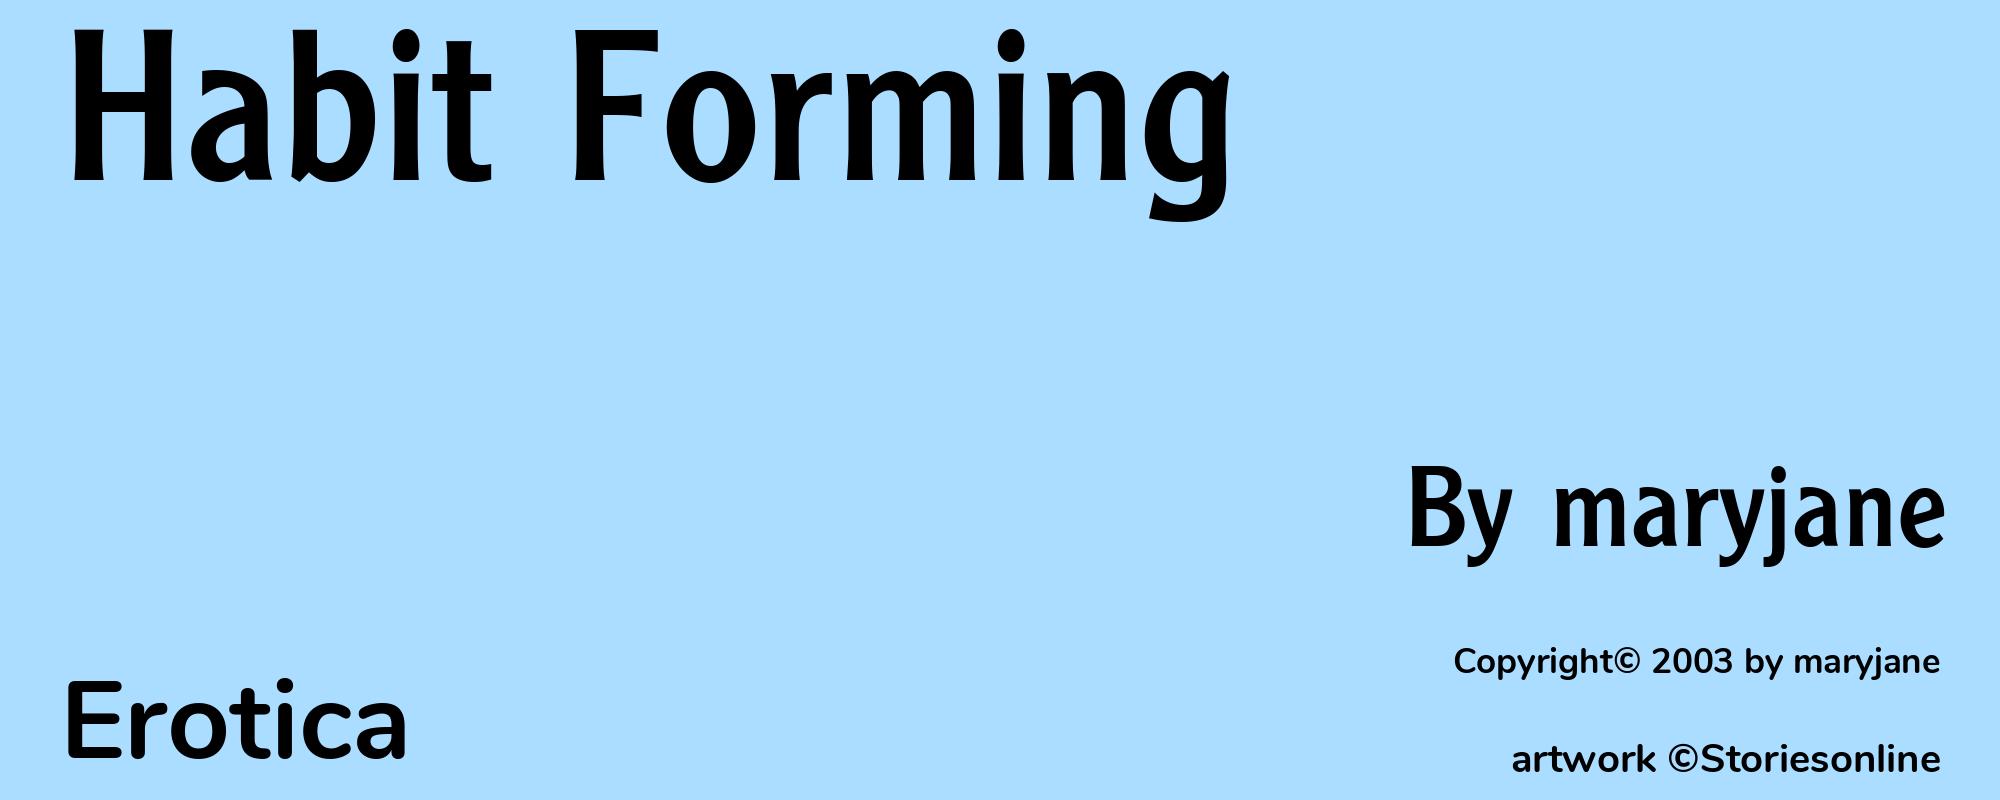 Habit Forming - Cover